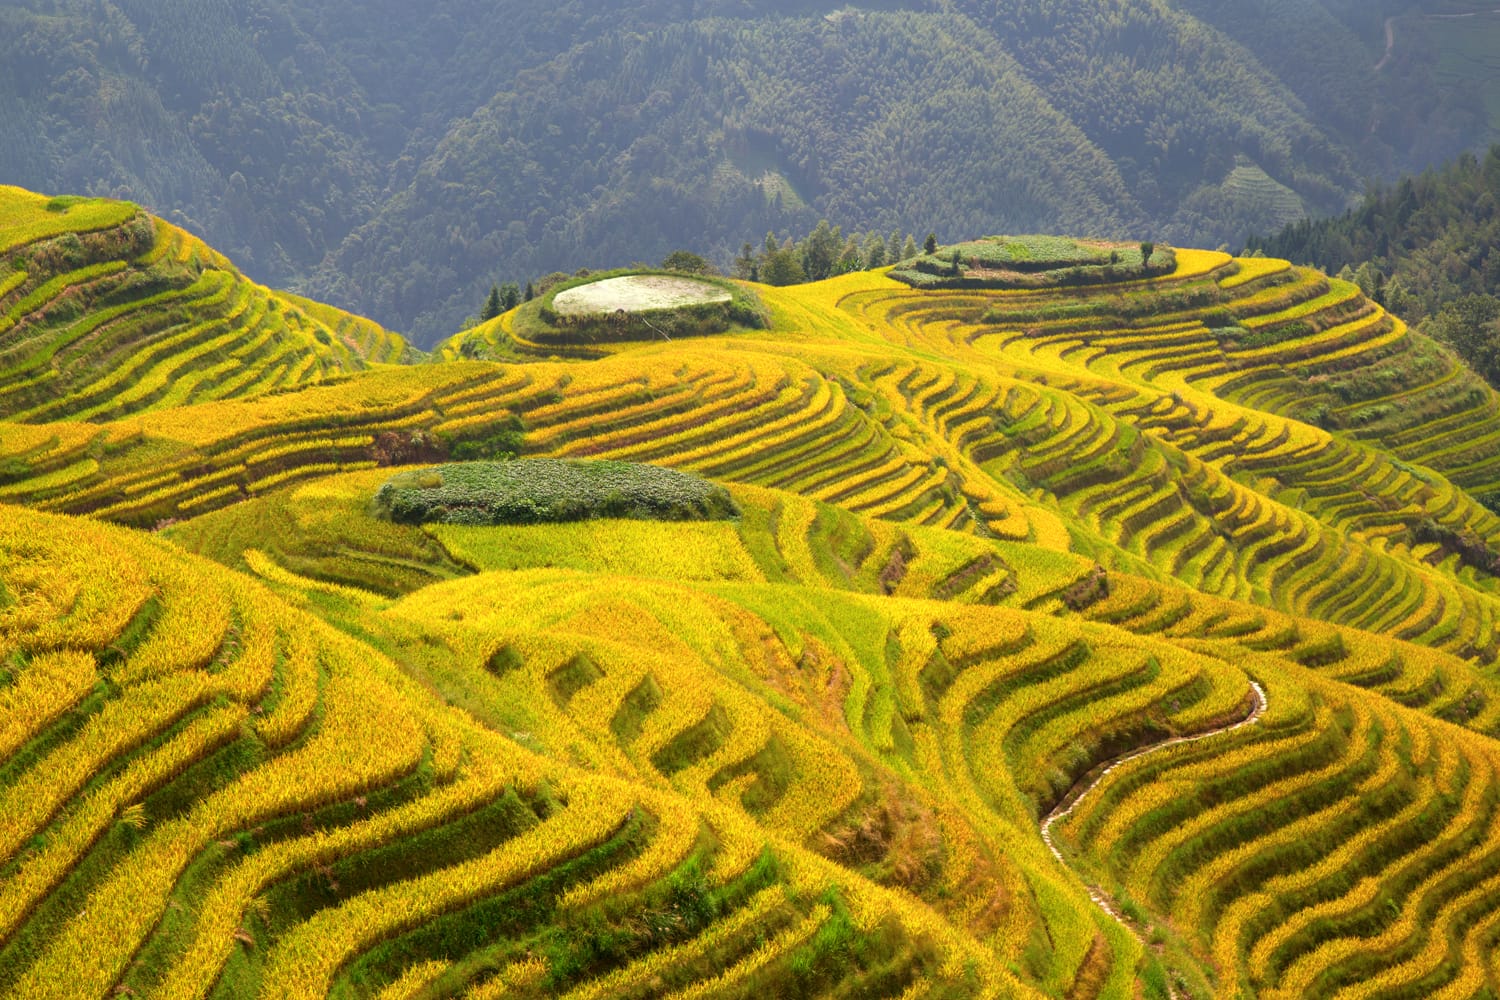 The Longsheng Rice Terraces(Dragon's Backbone) also known as Longji Rice Terraces are located in Longsheng County, about 100 kilometres (62 mi) from Guilin, Guangxi, China